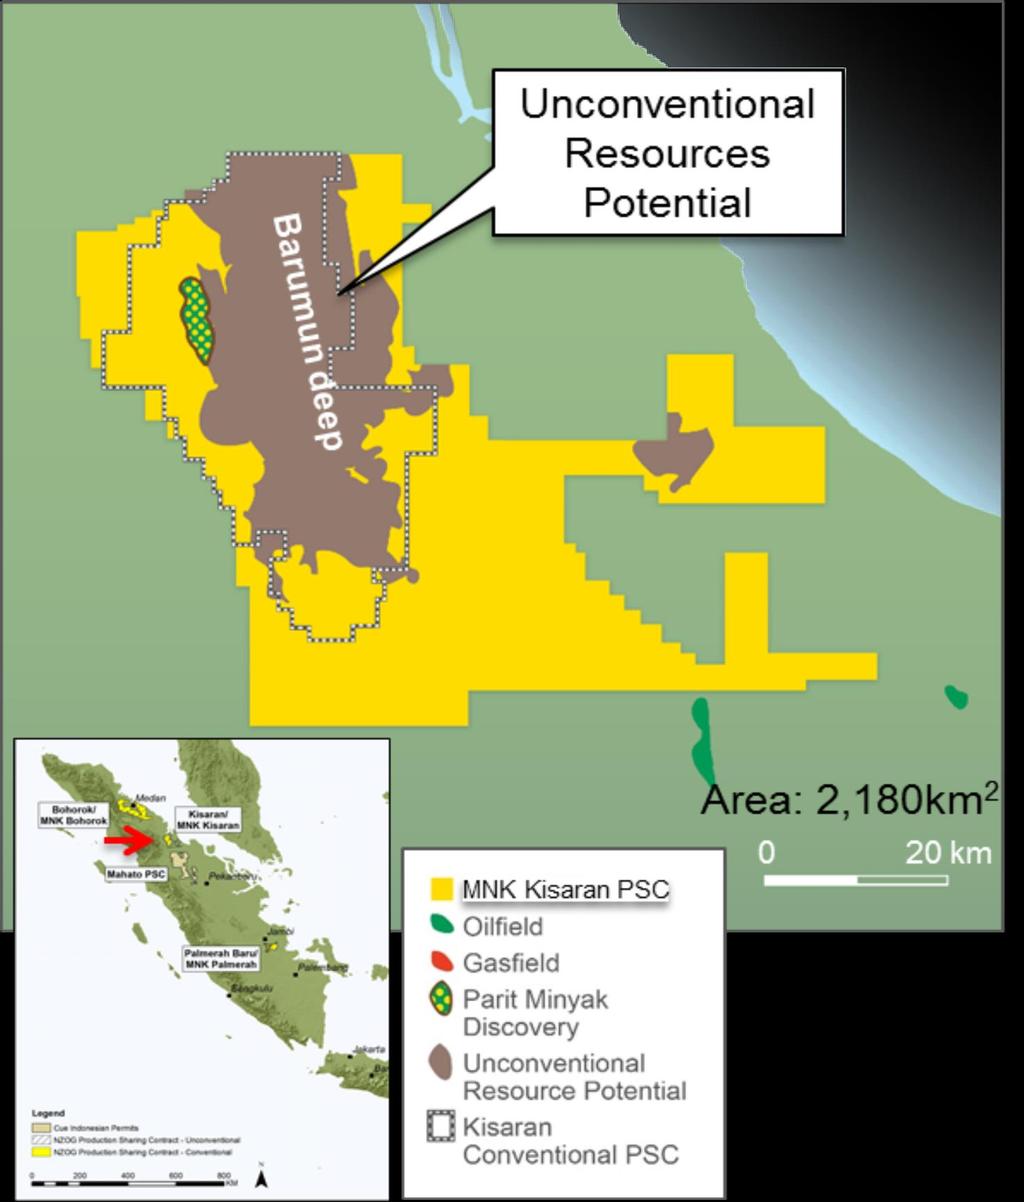 Unconventional MNK Kisaran PSC Lead 292 mmboe of Net, Unrisked Prospective Resources The MNK Kisaran PSC is located in the Central Sumatra Basin, underlying the existing conventional Kisaran PSC.